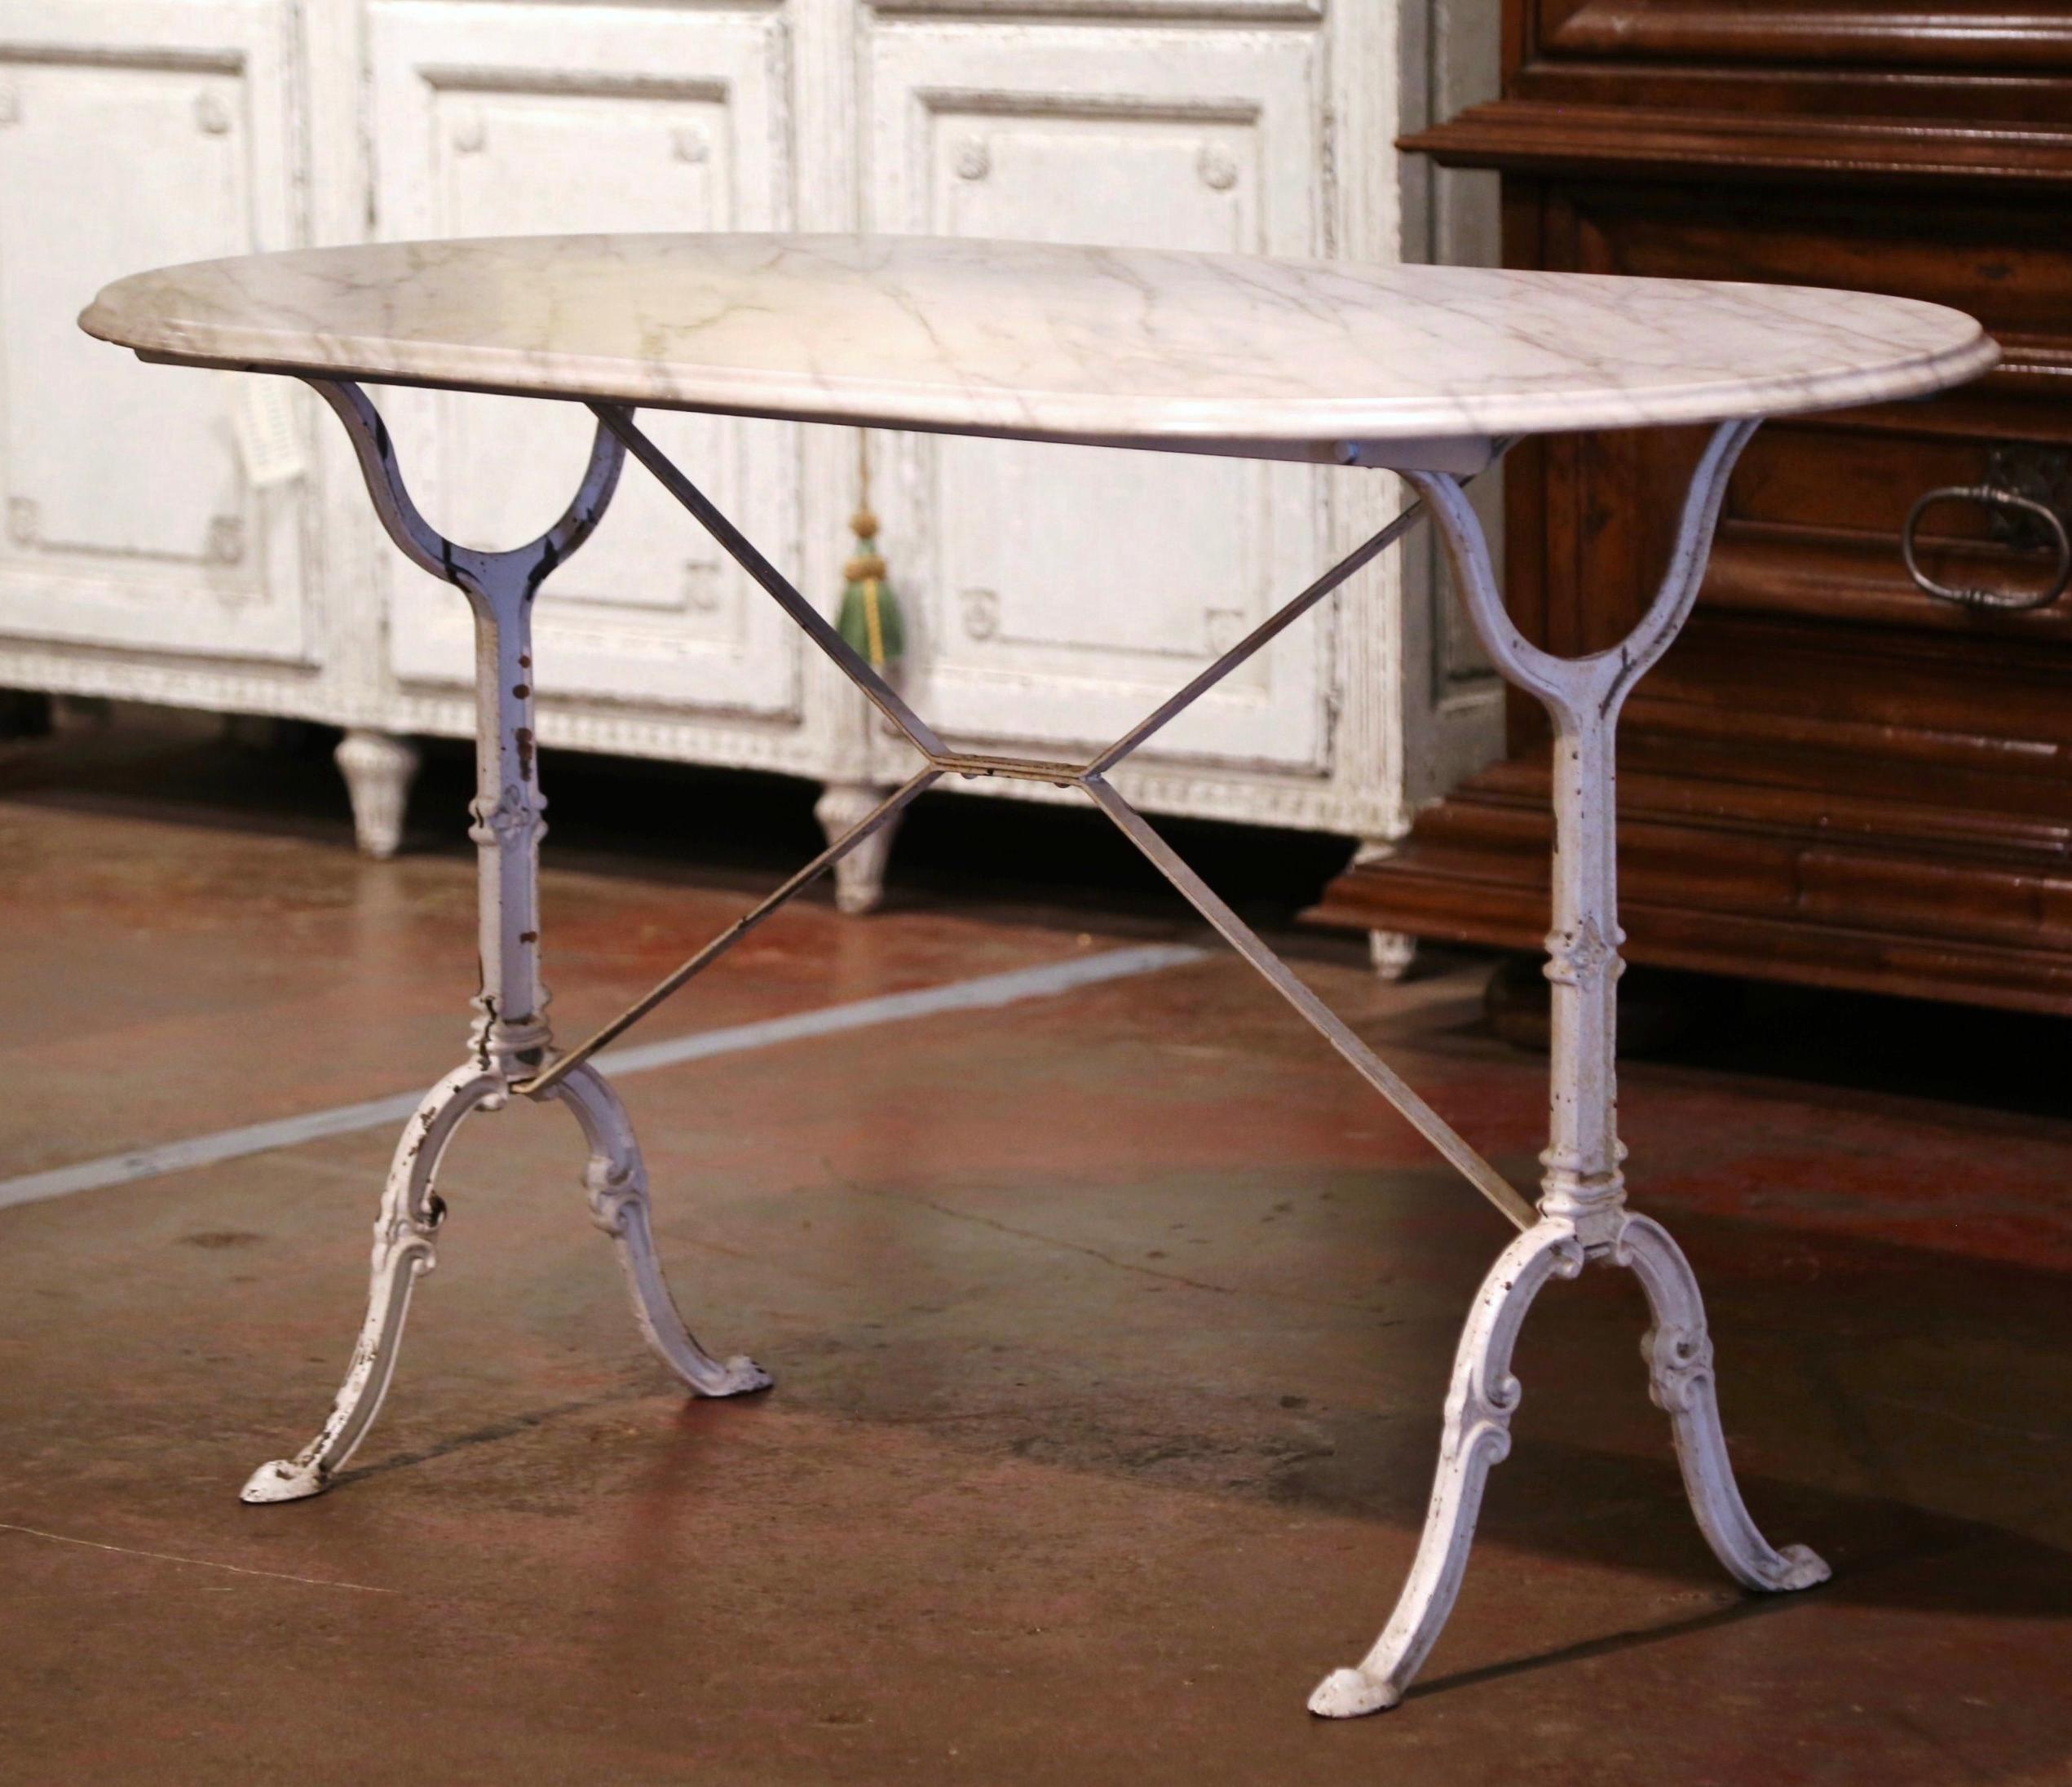 Bring the beauty of Paris into your home with this sophisticated antique pastry table. Crafted in France circa 1930, the table stands on two white painted iron pedestal legs connected with a center stretcher. The top is dressed with a racetrack